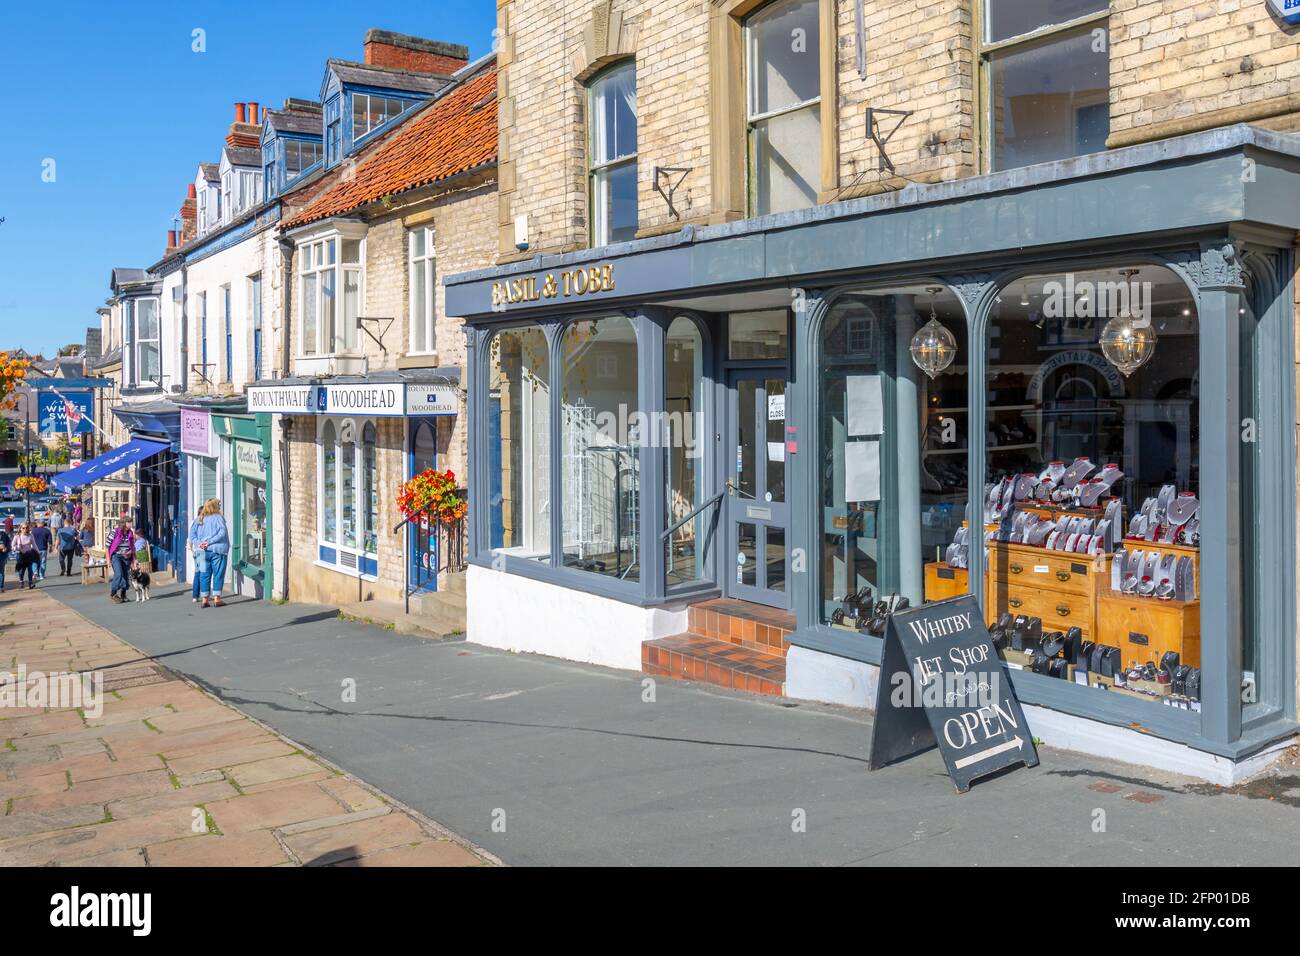 View of shops on Market Place, Pickering, North Yorkshire, England, United Kingdom, Europe Stock Photo